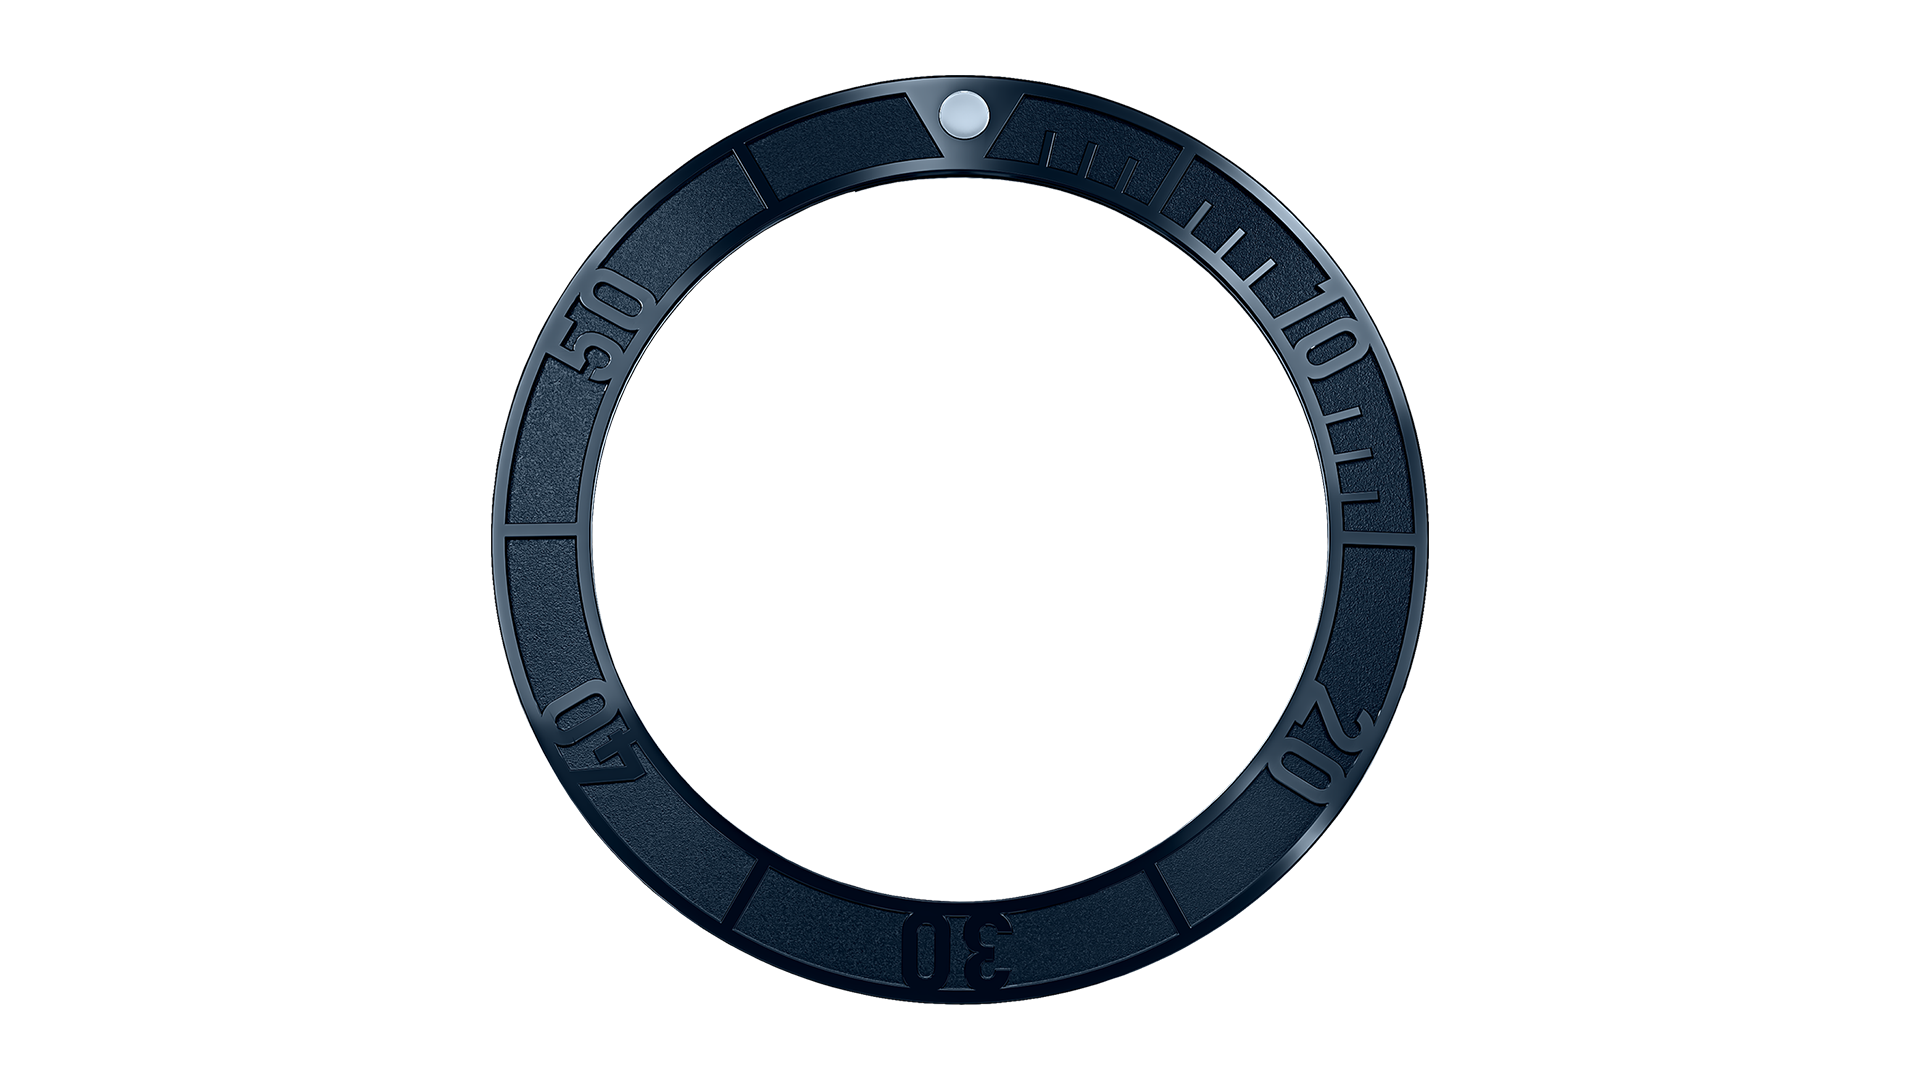 1_Formex_REEF_Automatic_Chronometer_COSC_300M_Bezel.png